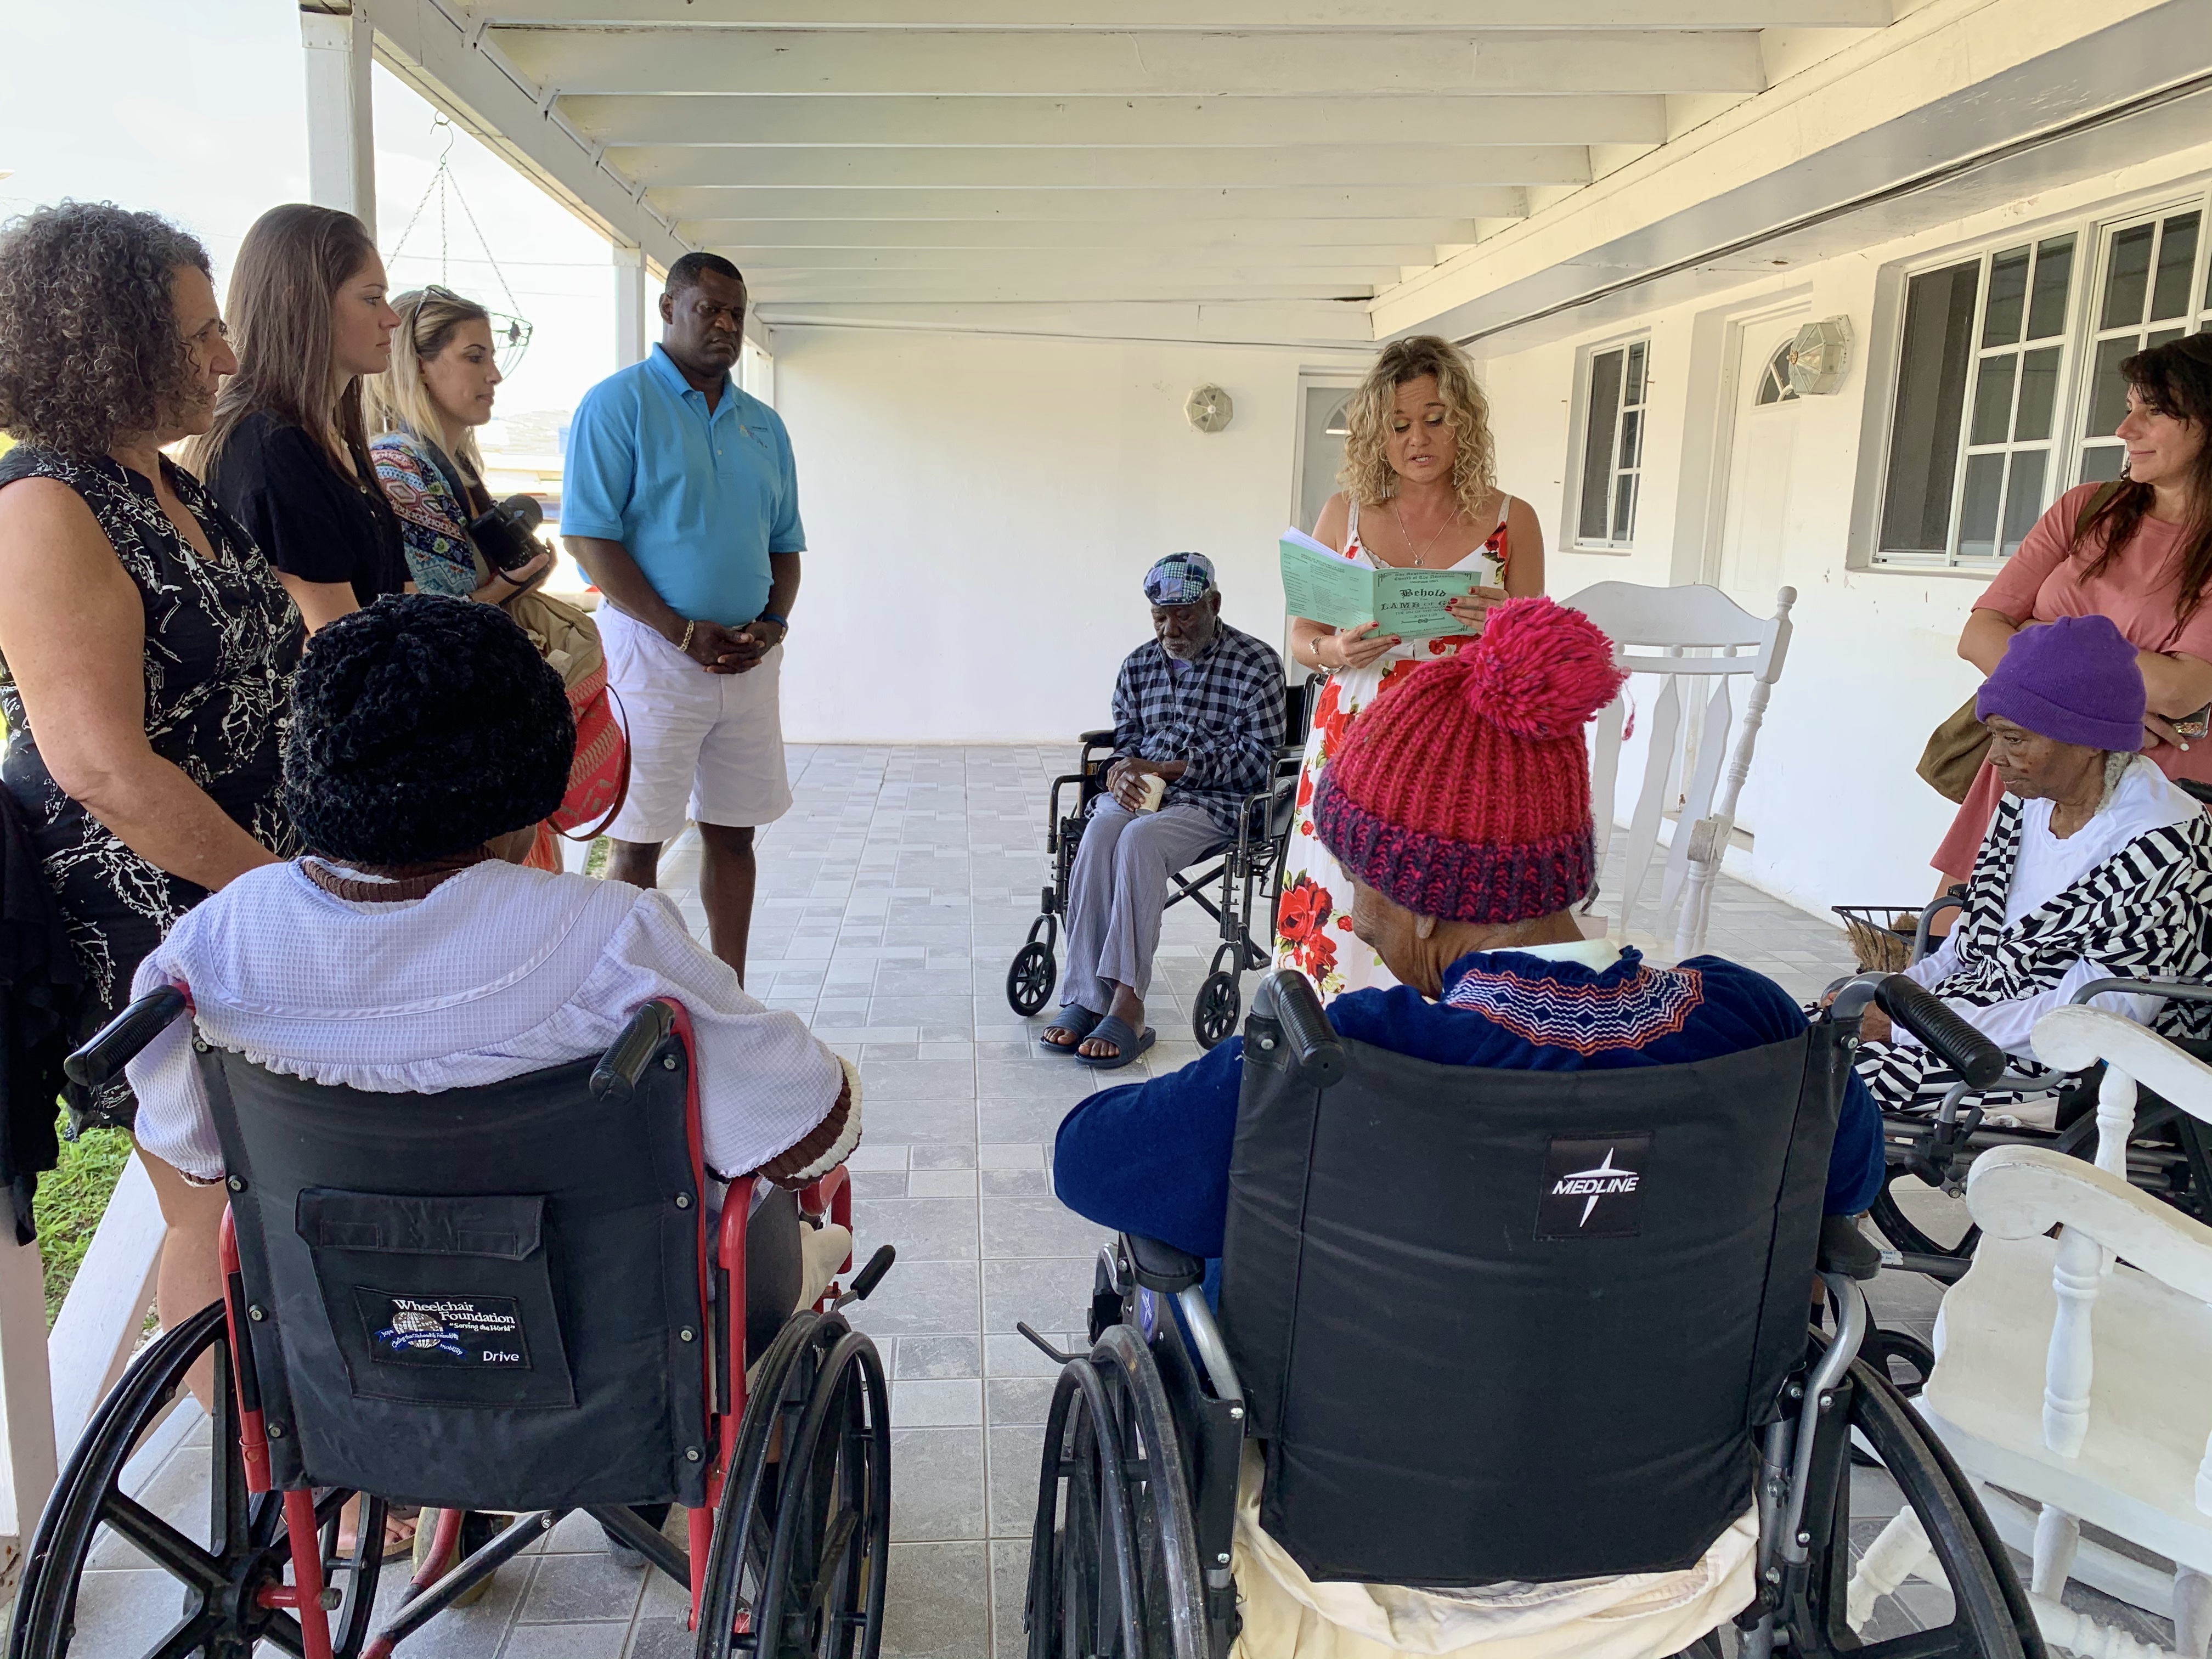 The familiarization tour included a stop to the Grand Bahama Home for the Aged where the visitors spent time reading and socializing with the residents.